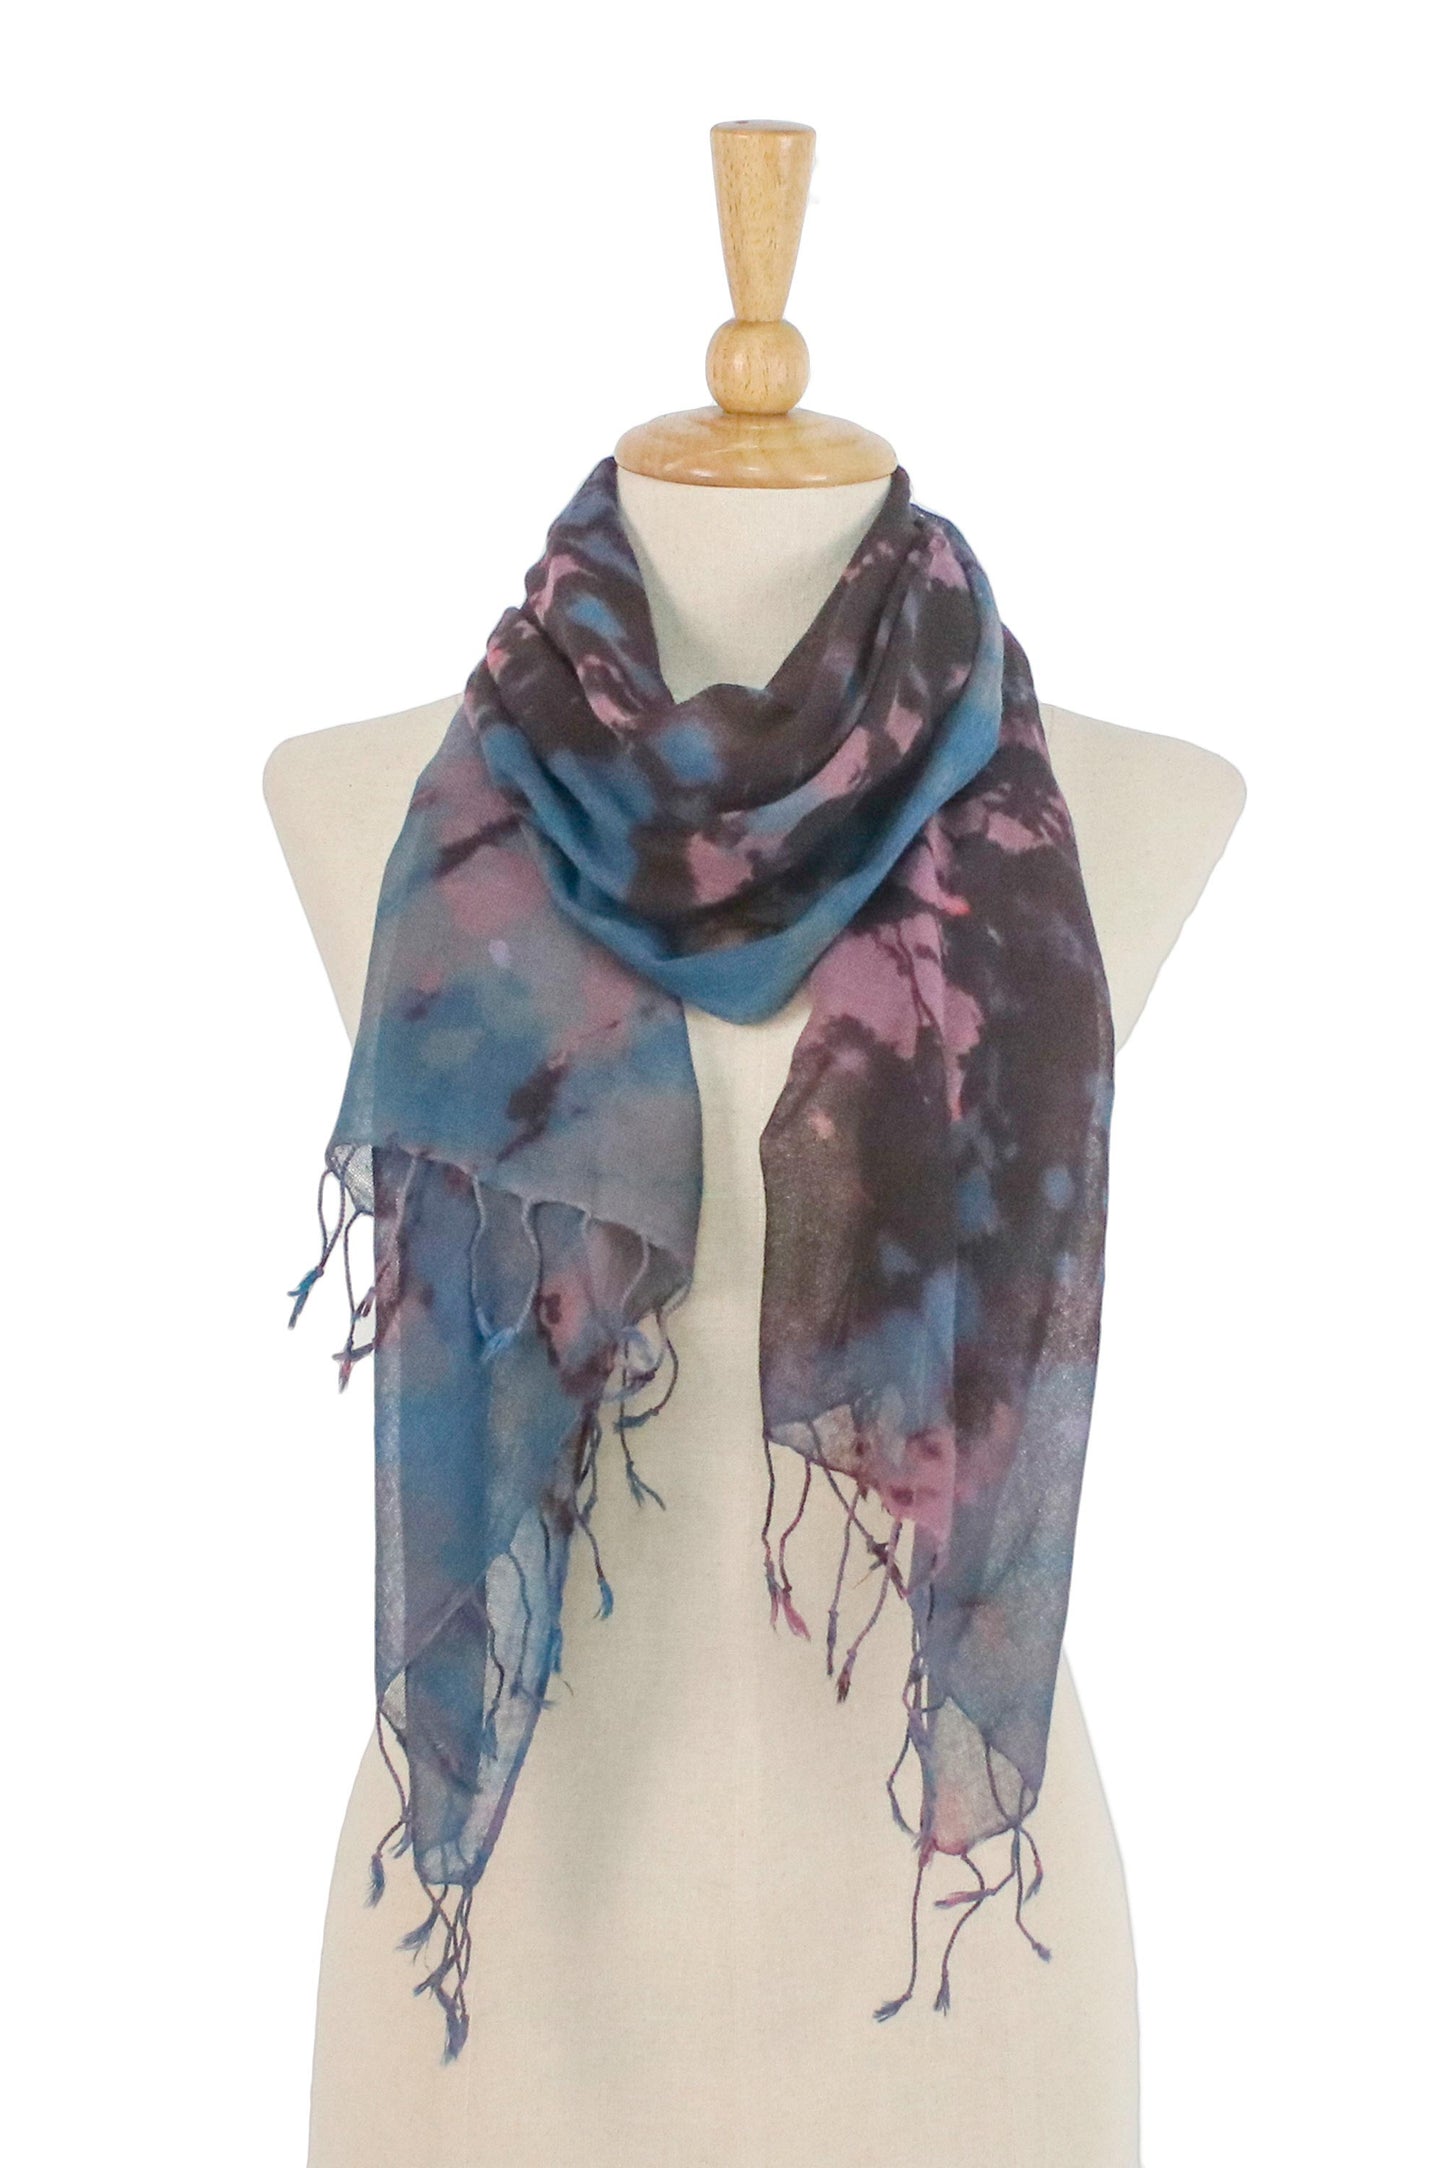 Artistic Colors Tie-Dyed Multicolored Cotton Wrap Scarf from Thailand